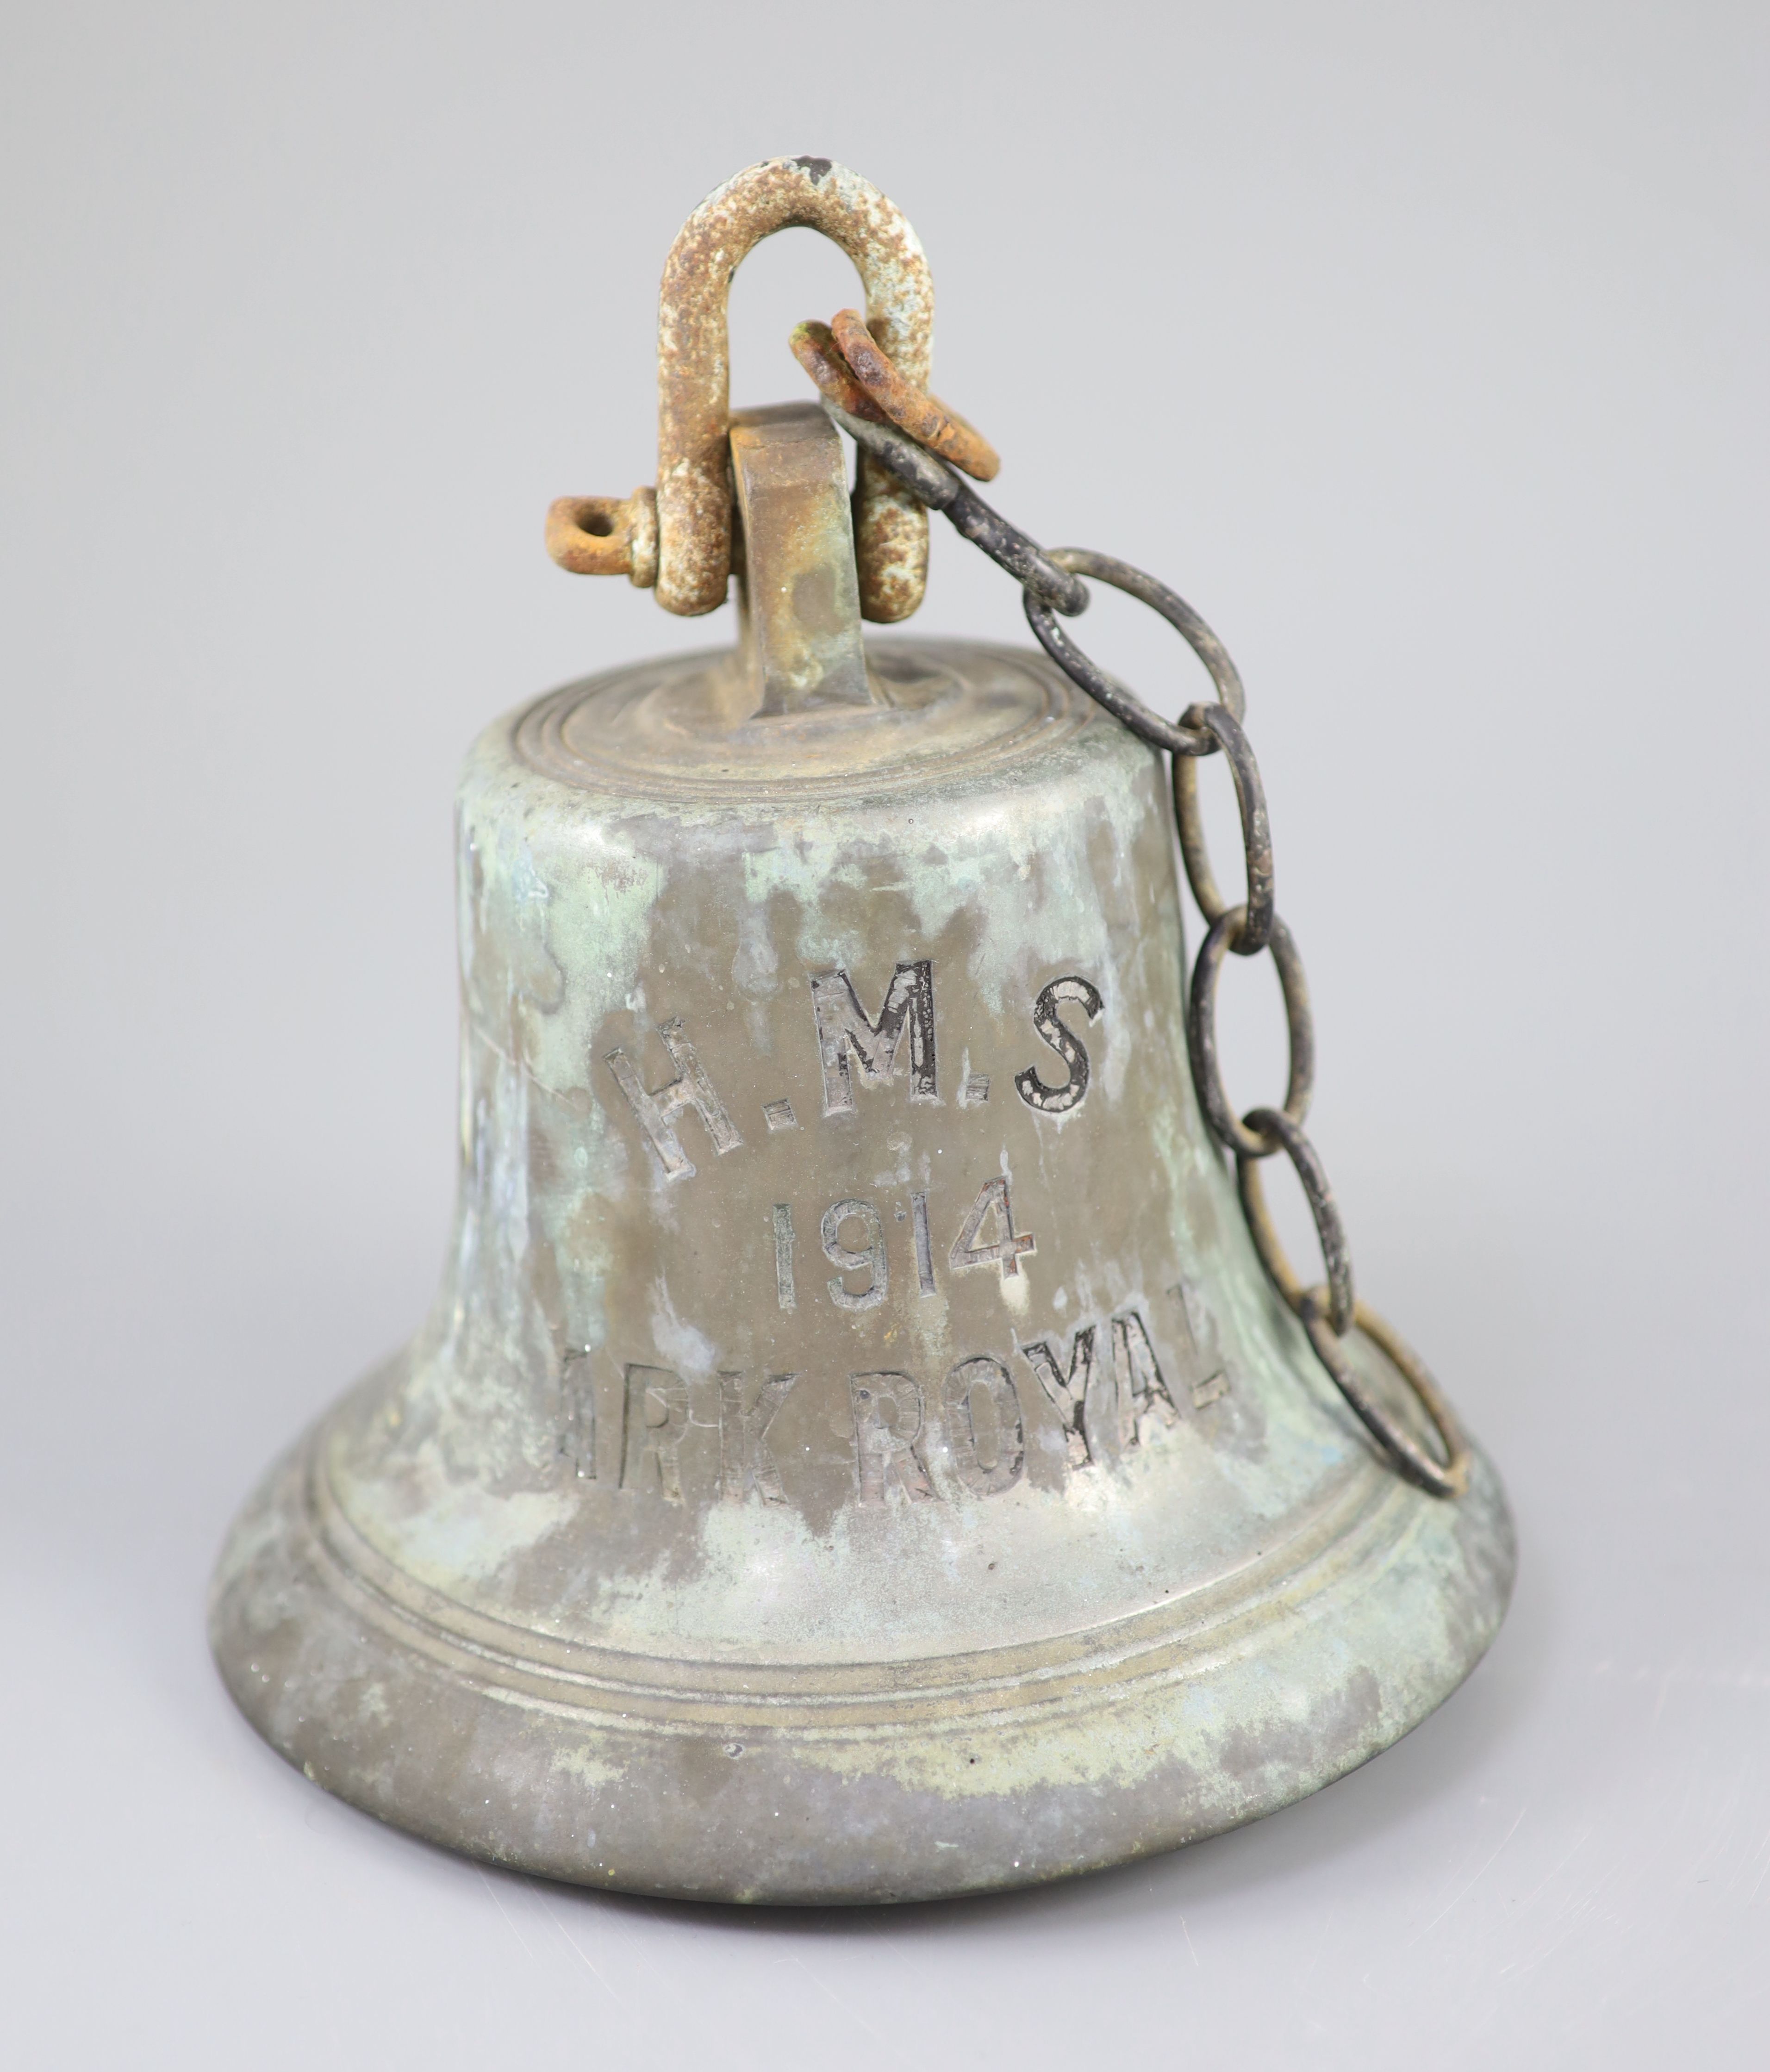 A bronze ships bell from the 1914 HMS Ark Royal, retaining its original clanger, height 8.25in. diameter 8.25in.